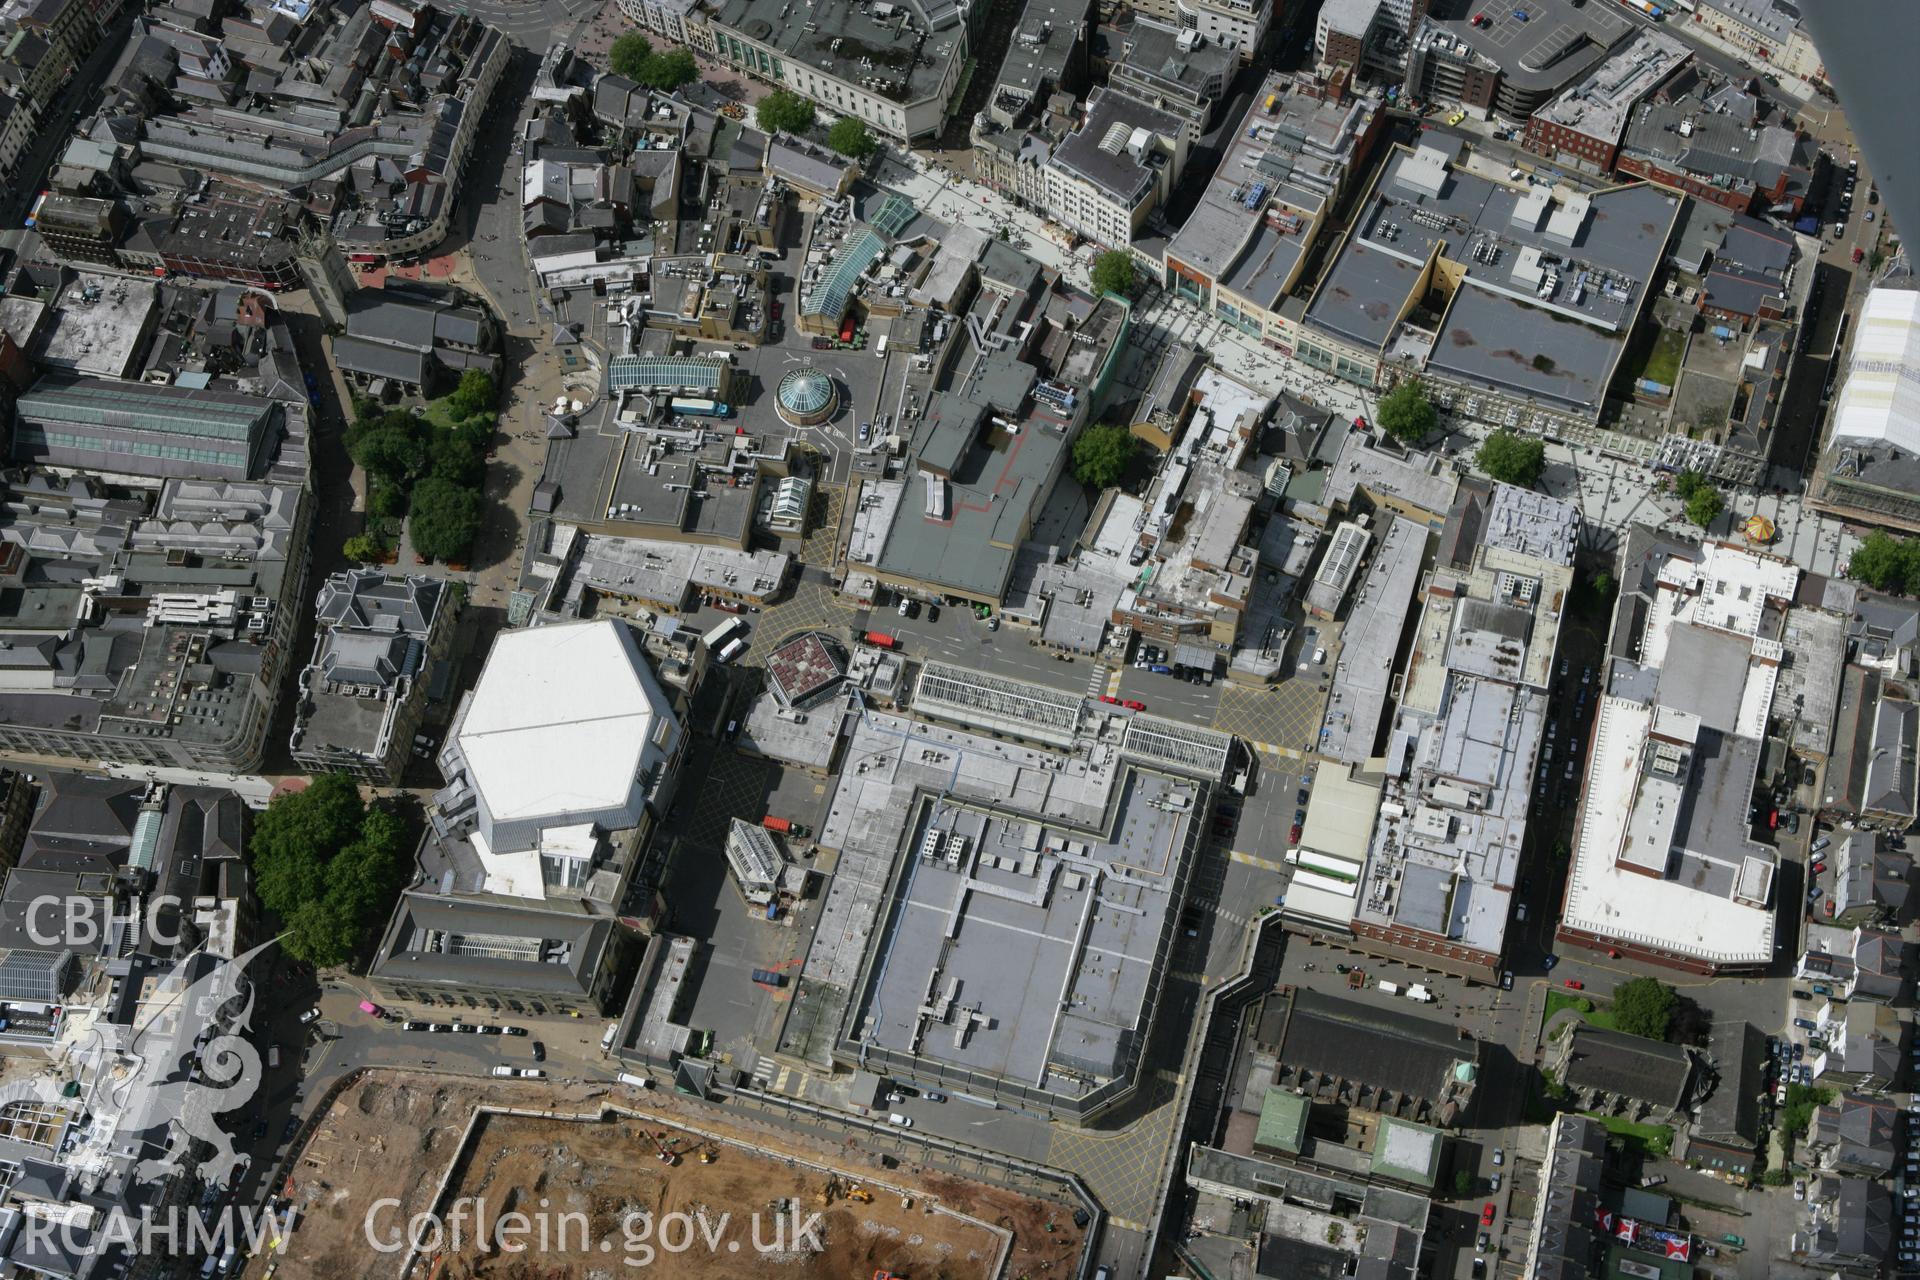 RCAHMW colour oblique aerial photograph of Cardiff. The city centre with Queen Street. Taken on 30 July 2007 by Toby Driver